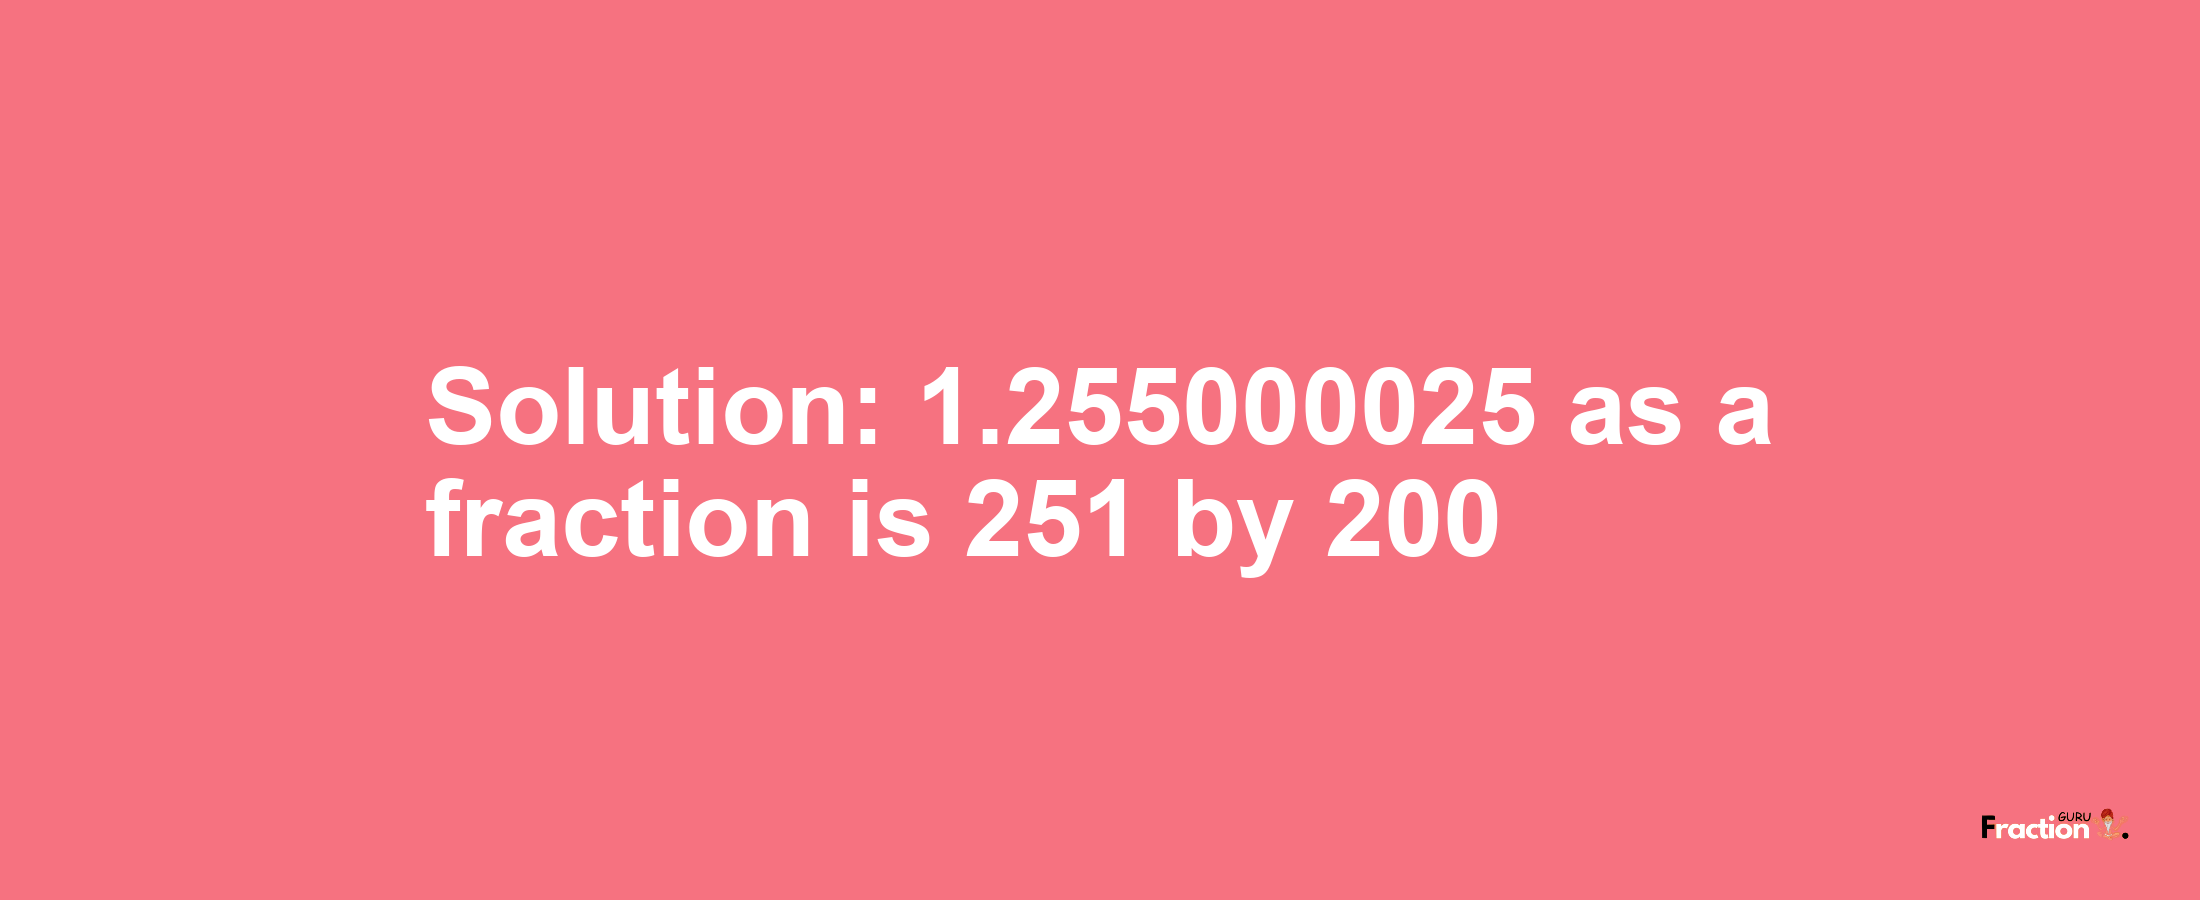 Solution:1.255000025 as a fraction is 251/200